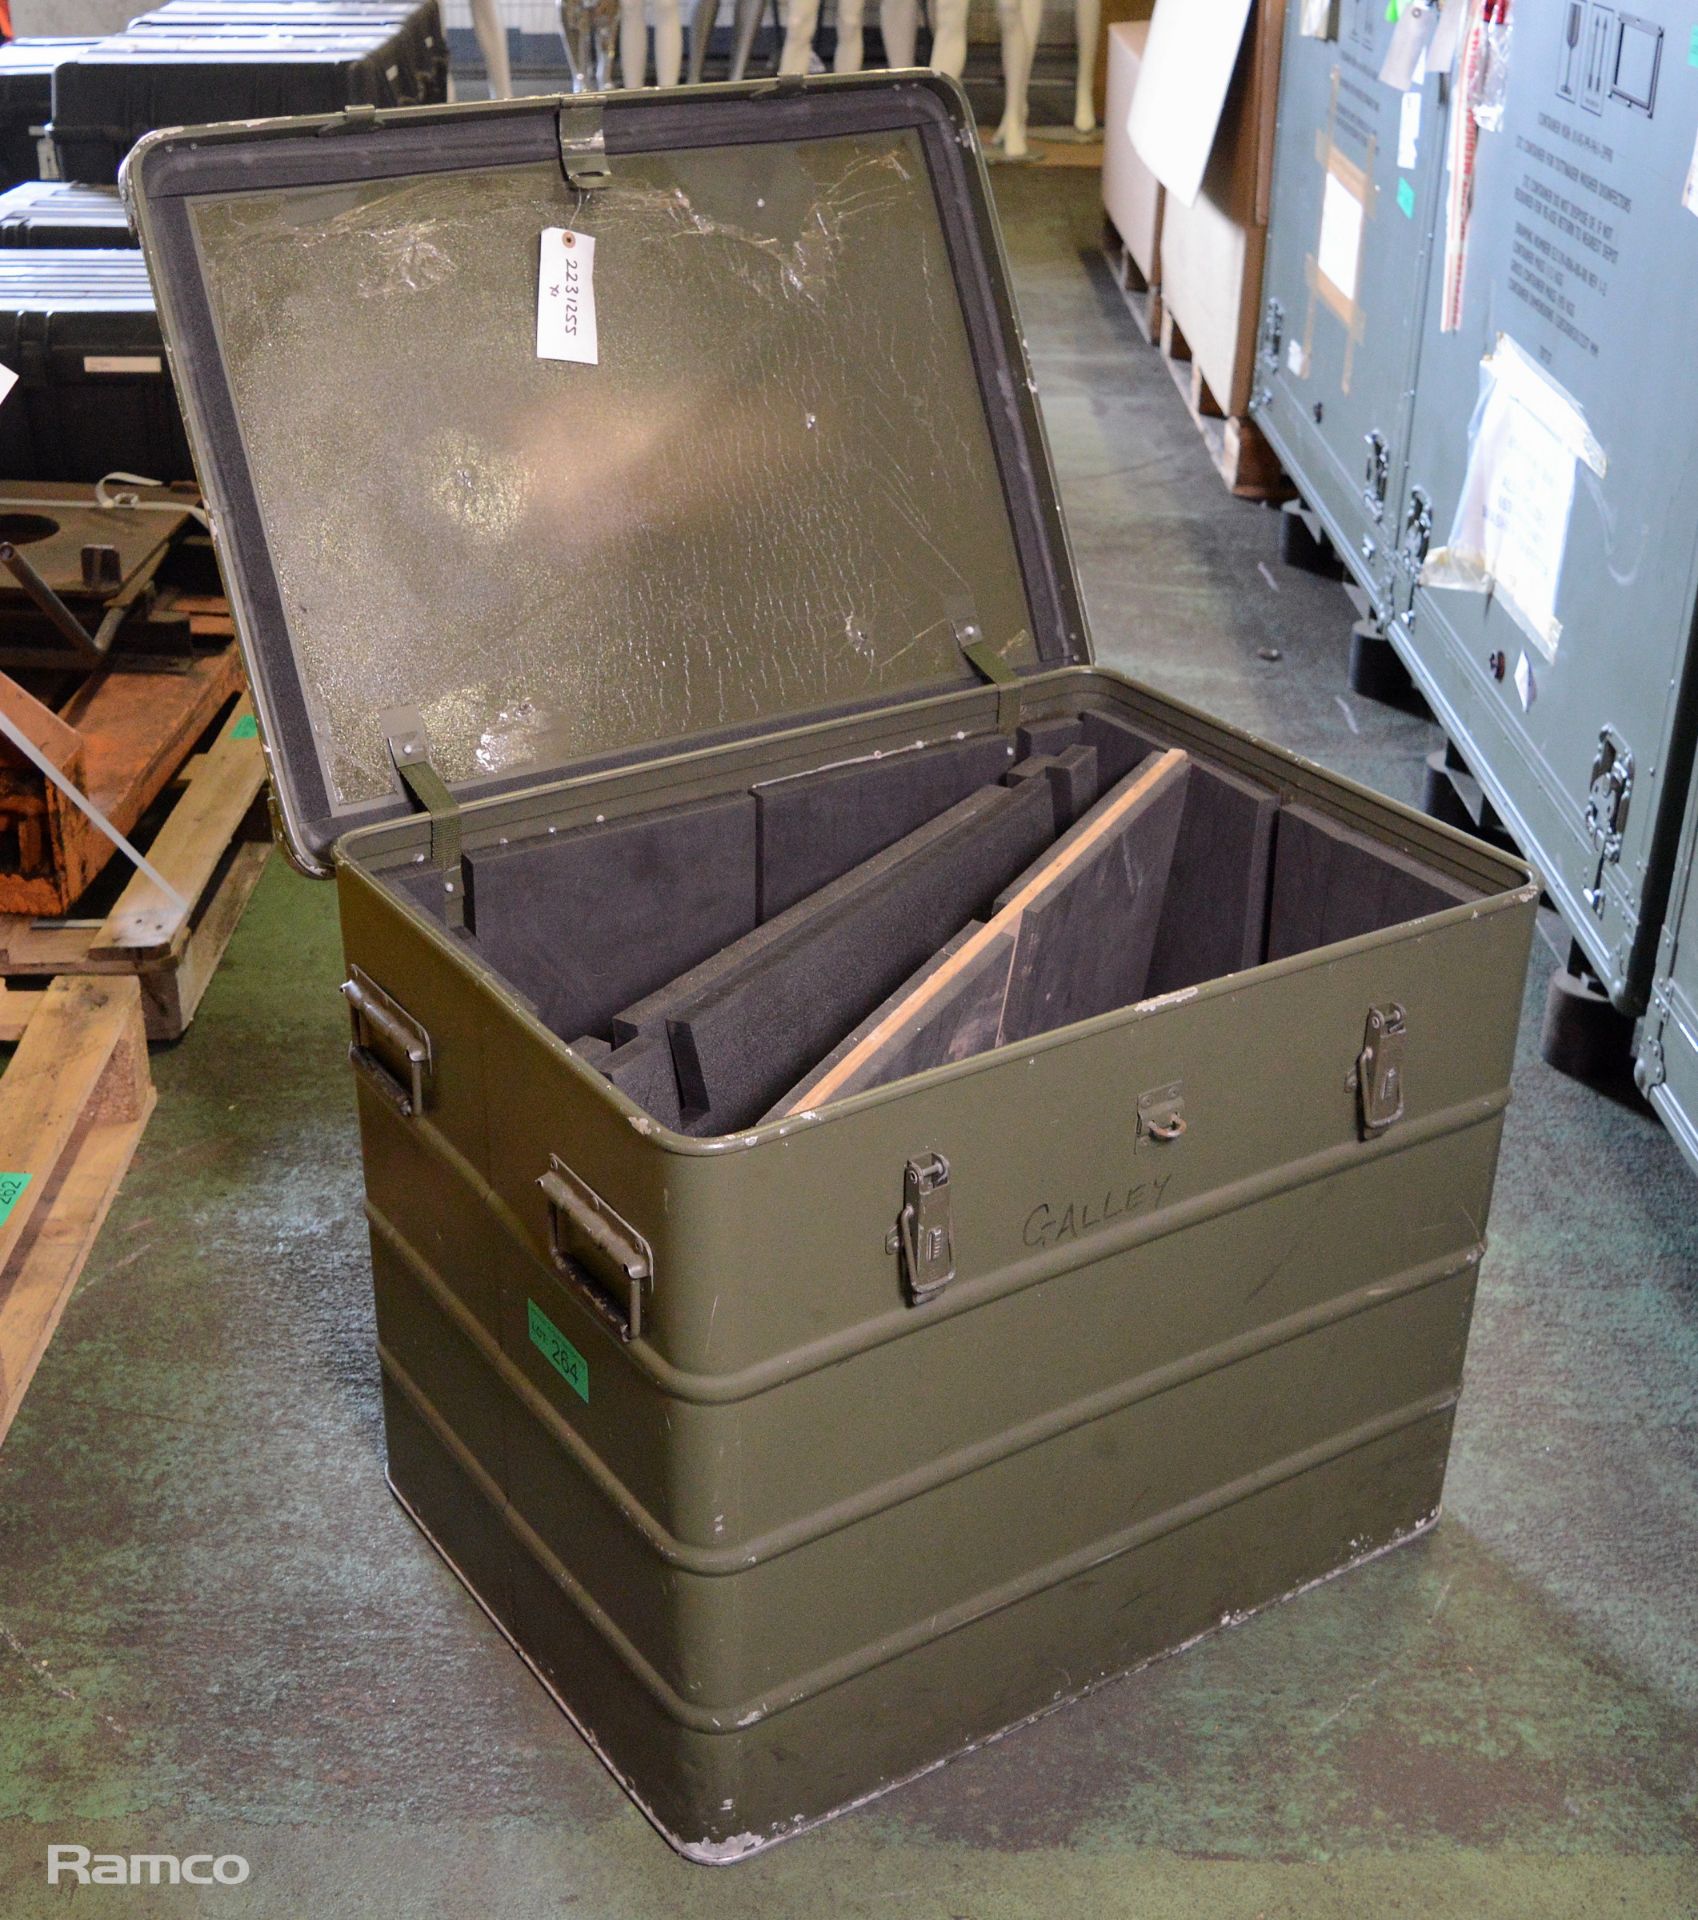 Protex aircraft storage container L80 x W59 x H62Cm - Image 2 of 4